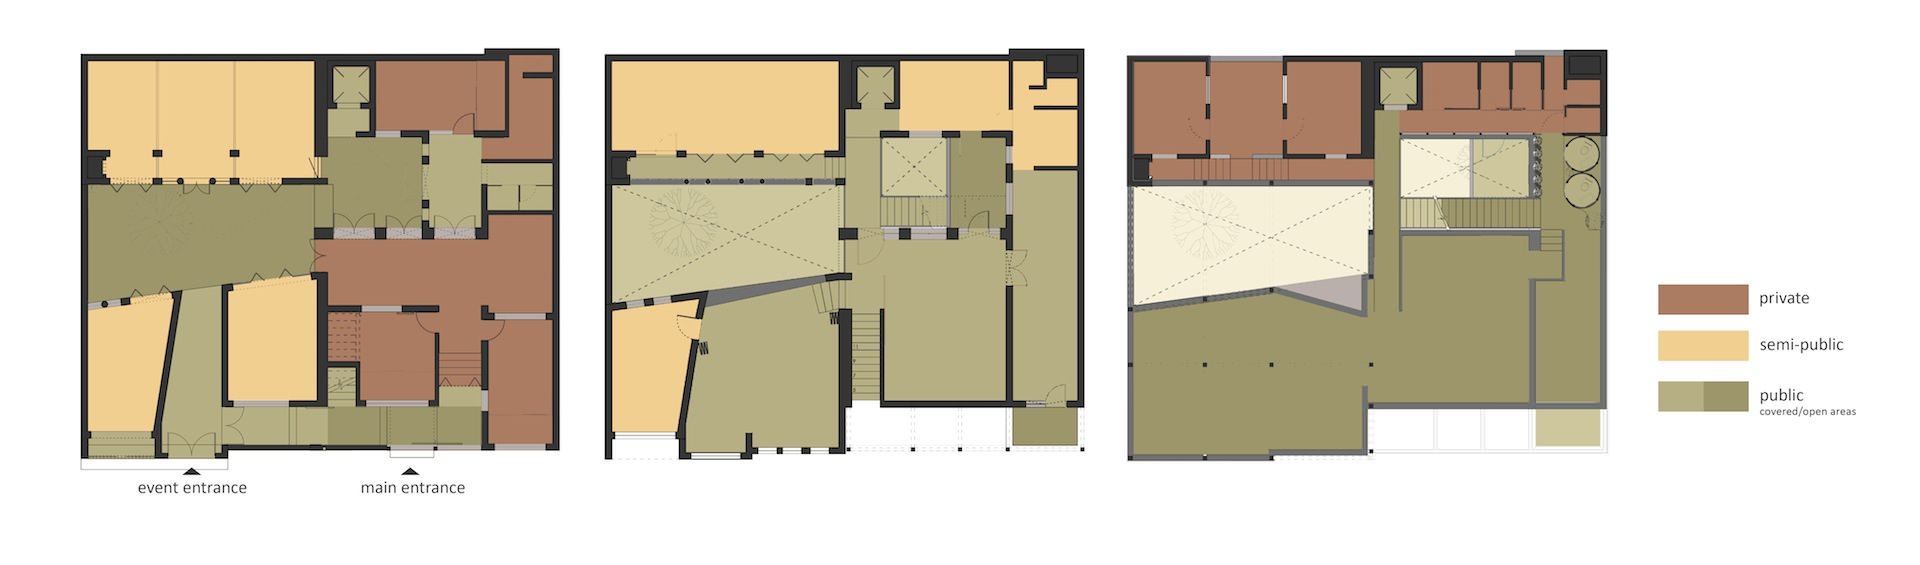 Plans of the new building. (Image: Lotus Design)